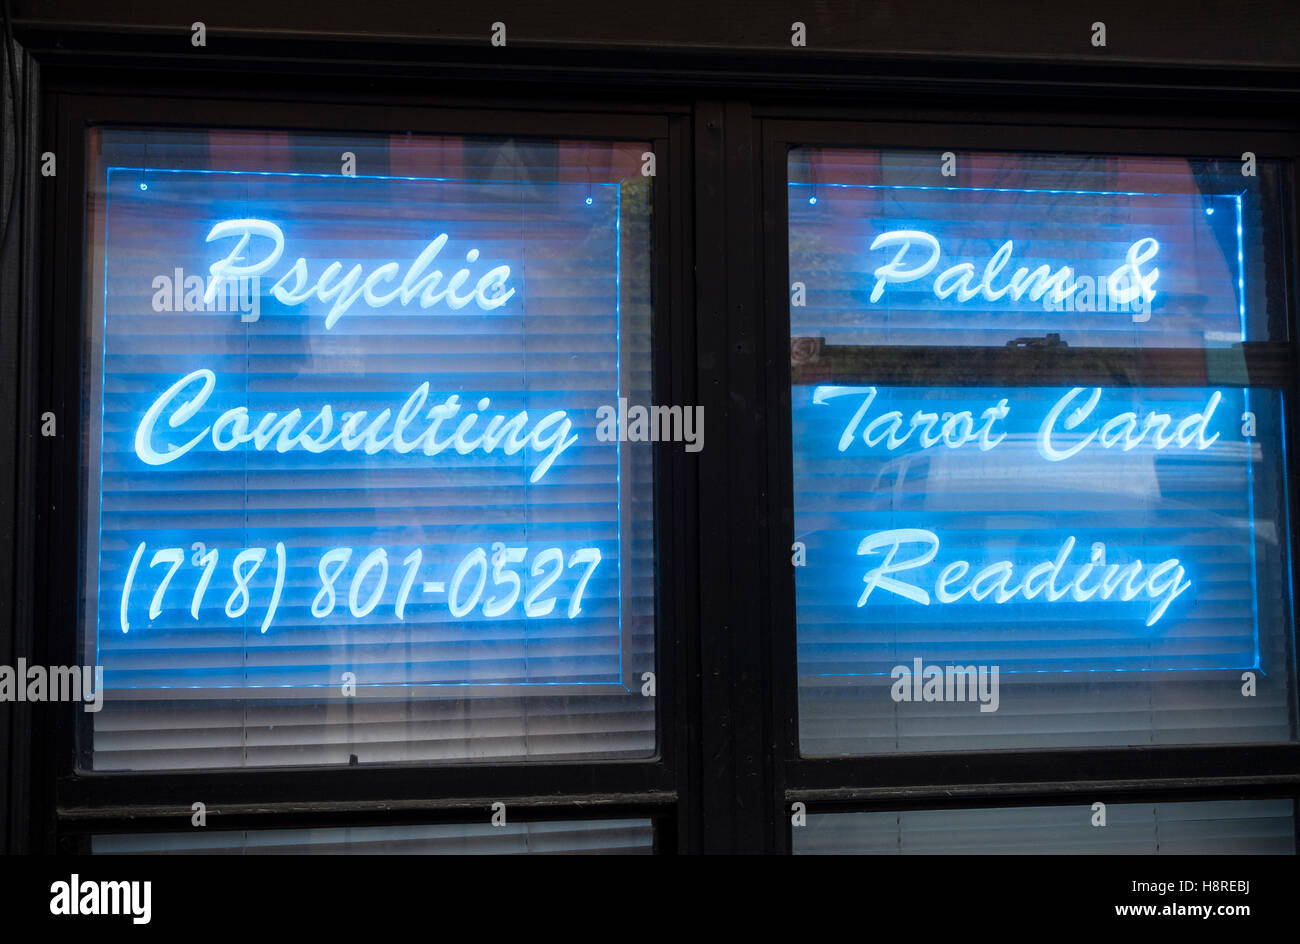 Psychic consulting neon sign in New York City Stock Photo